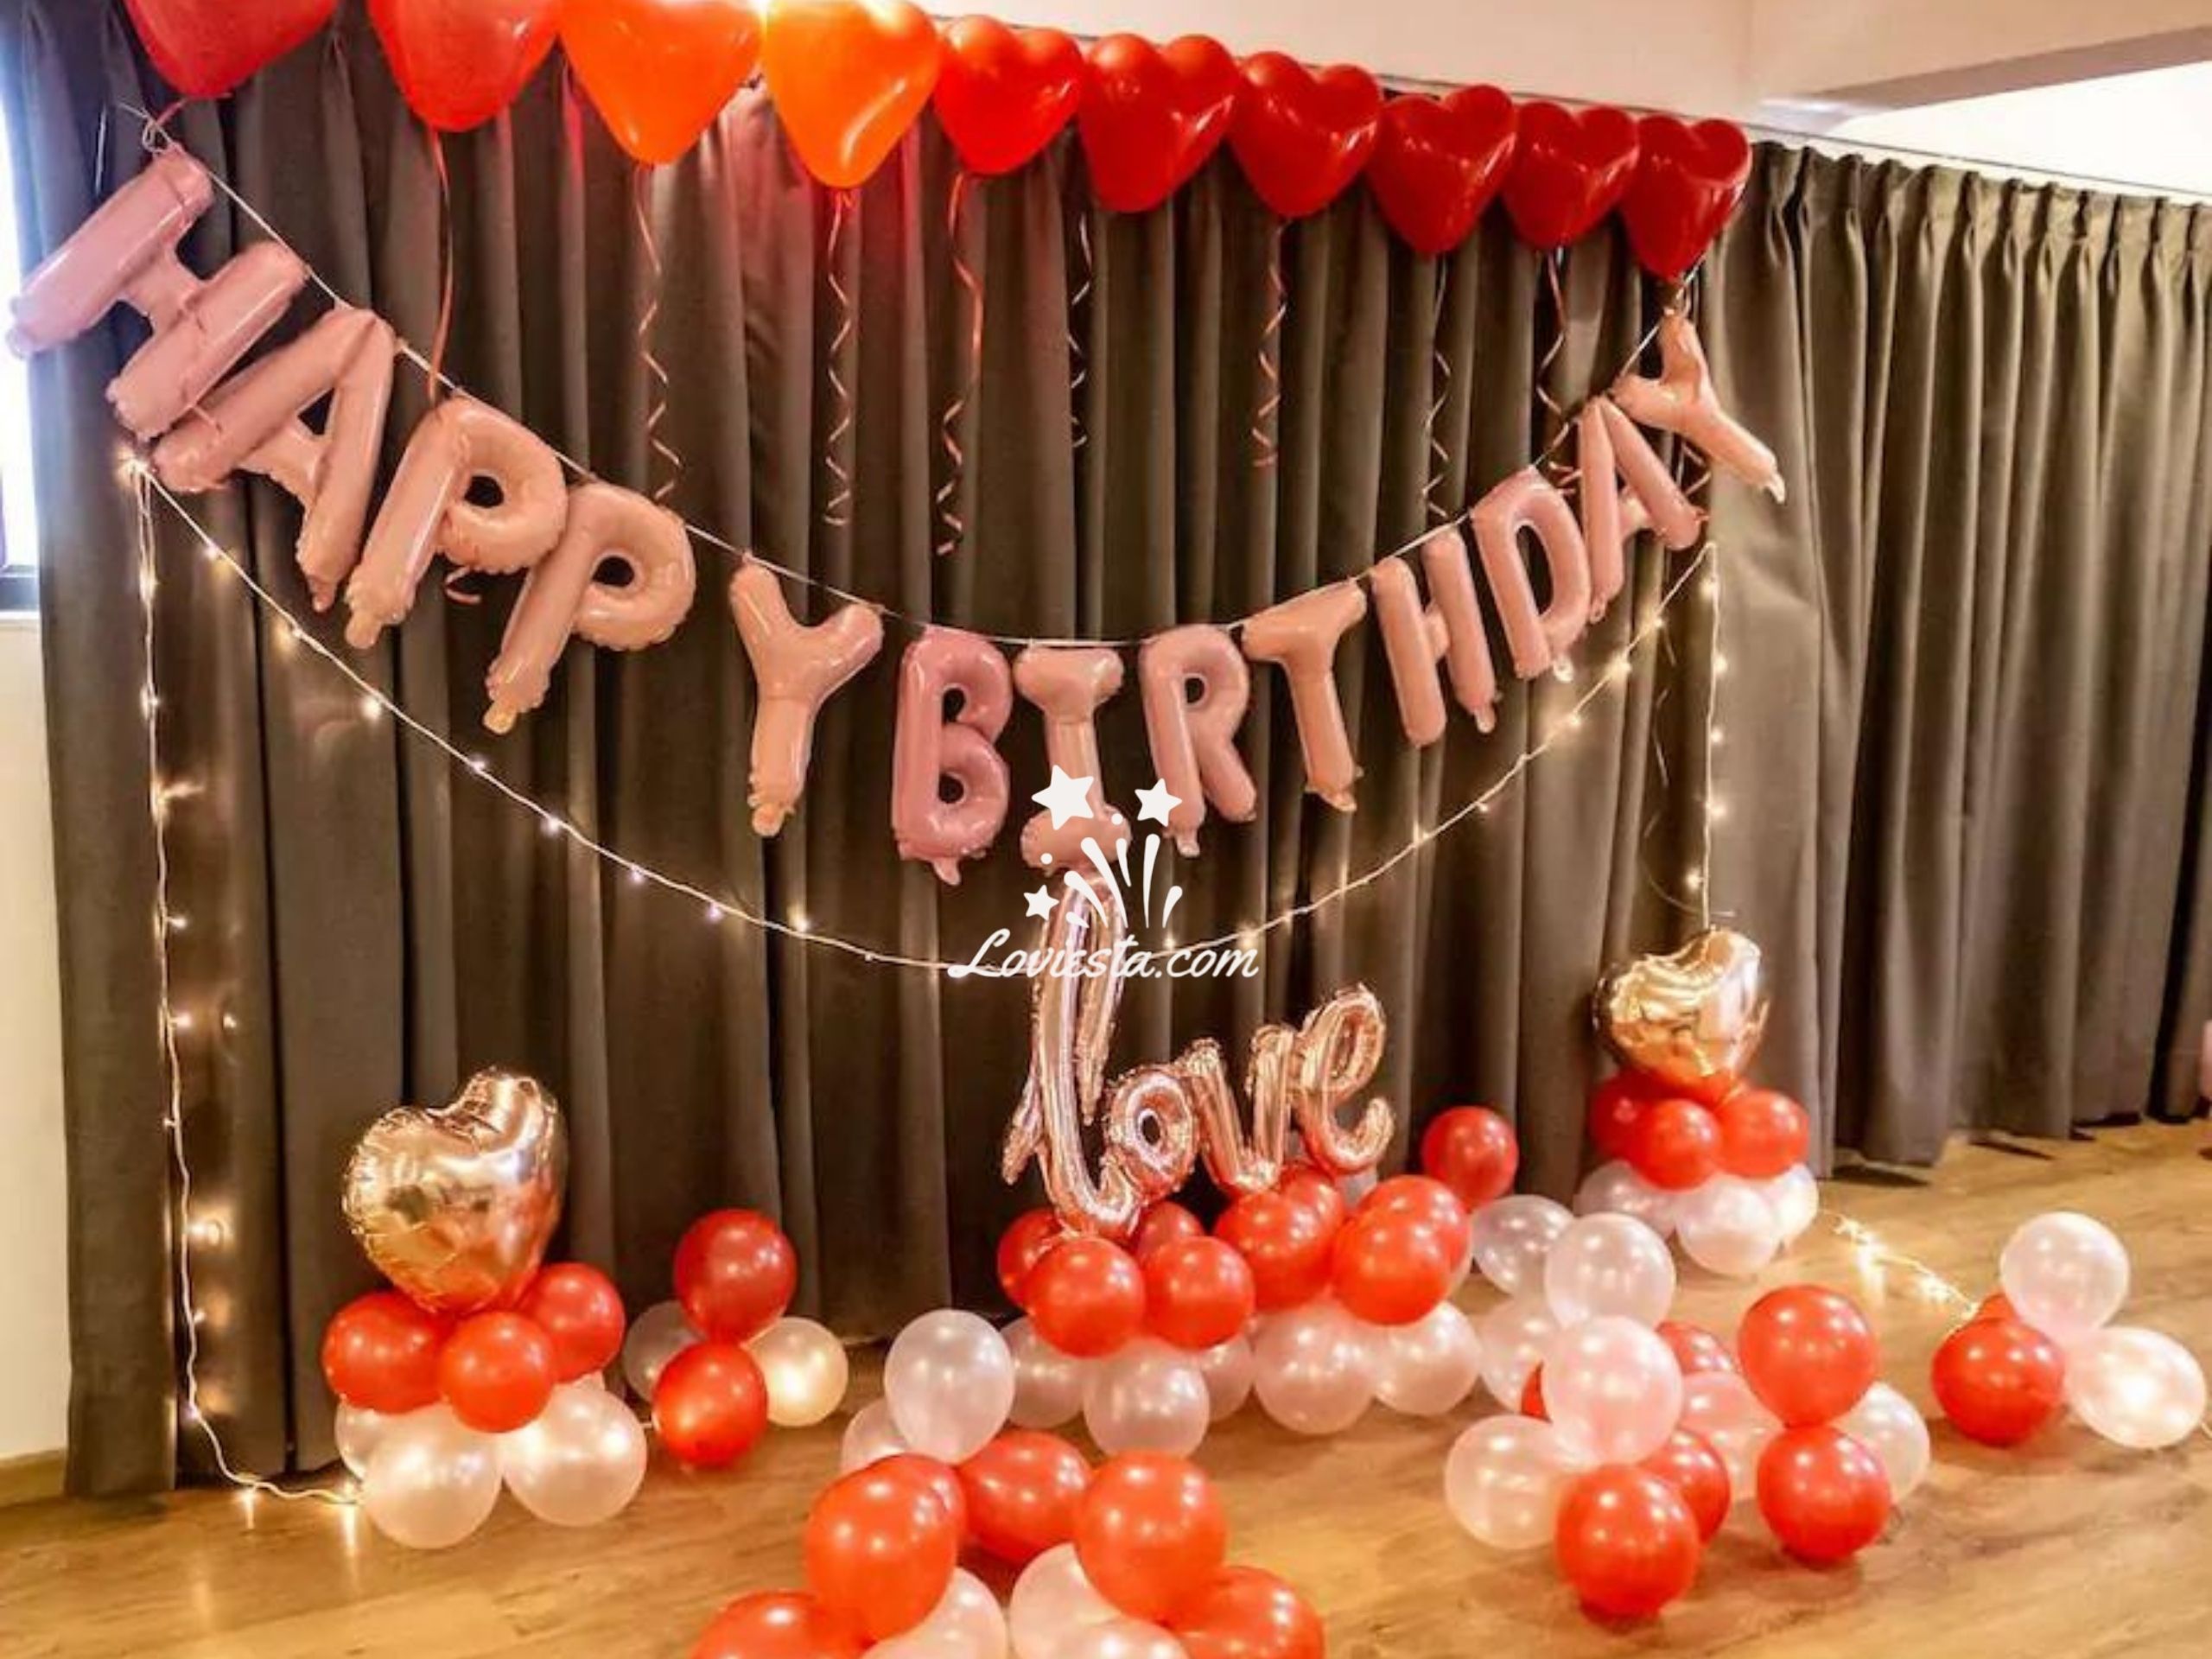 How to decorate a room for a birthday? - Celebration Management Blog